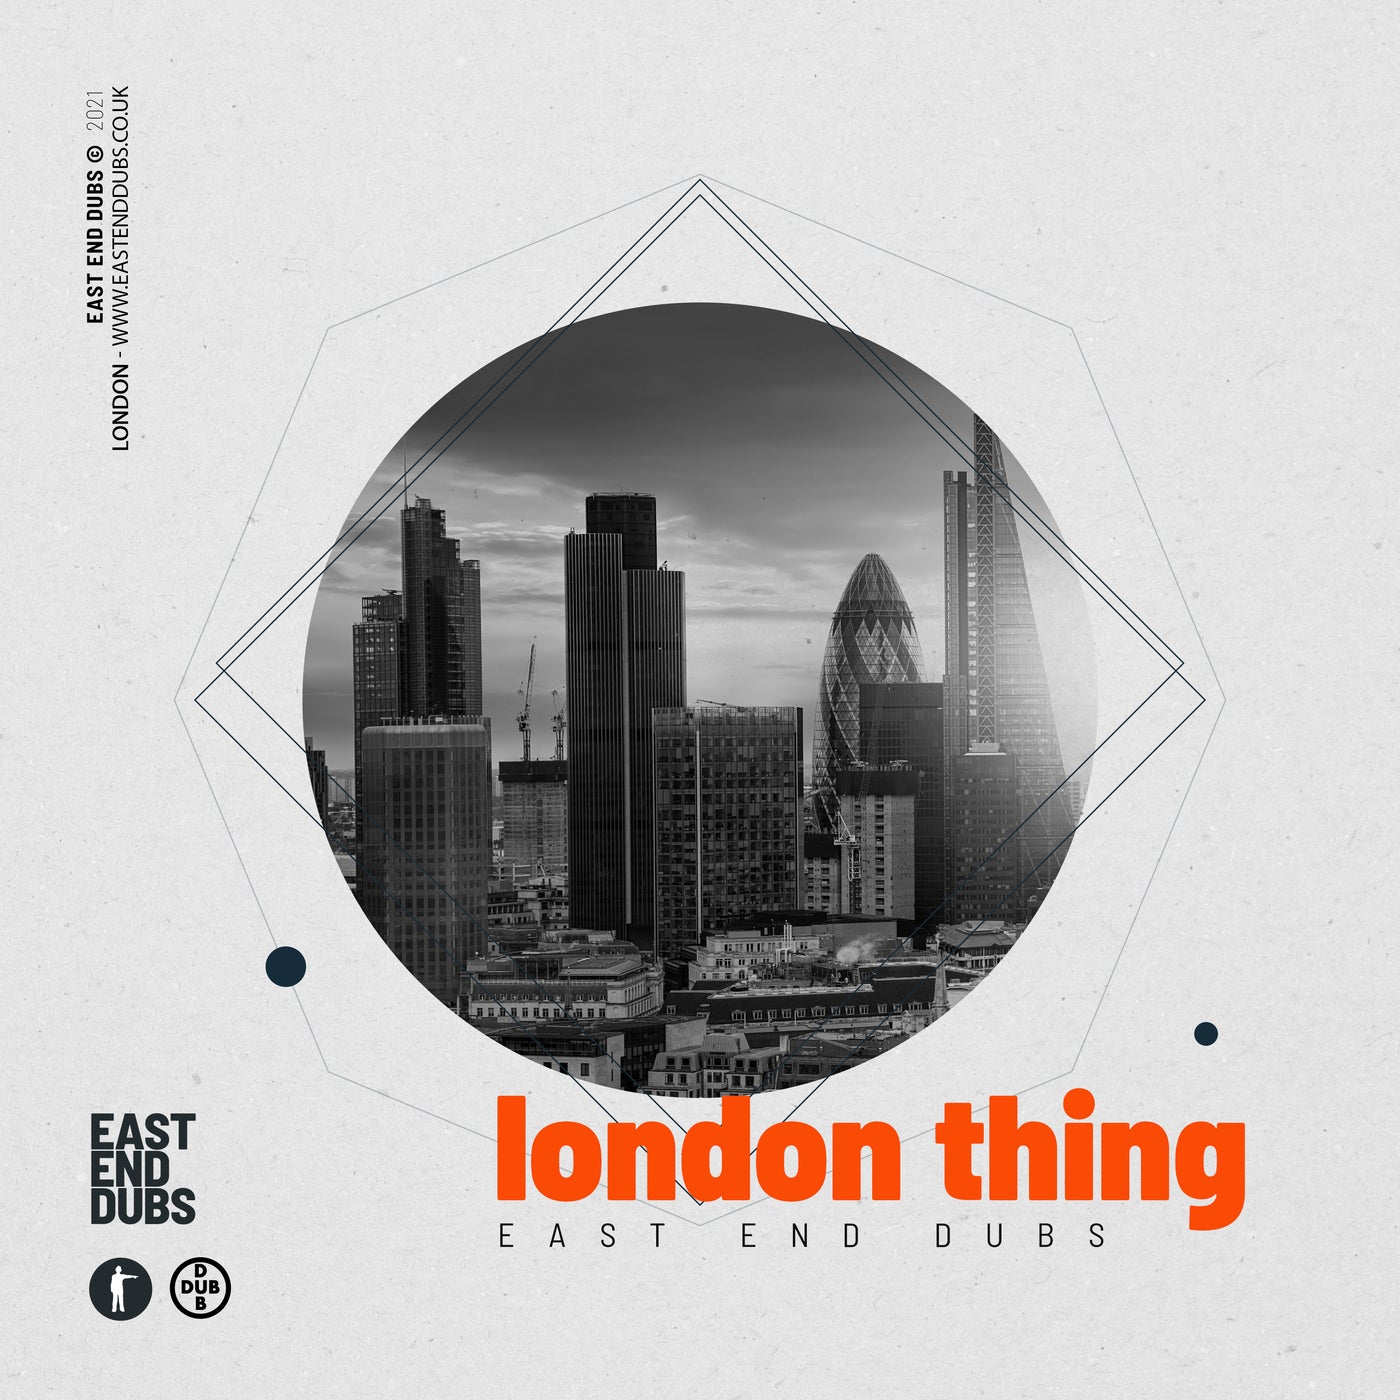 image cover: East End Dubs - London Thing / EEDD211